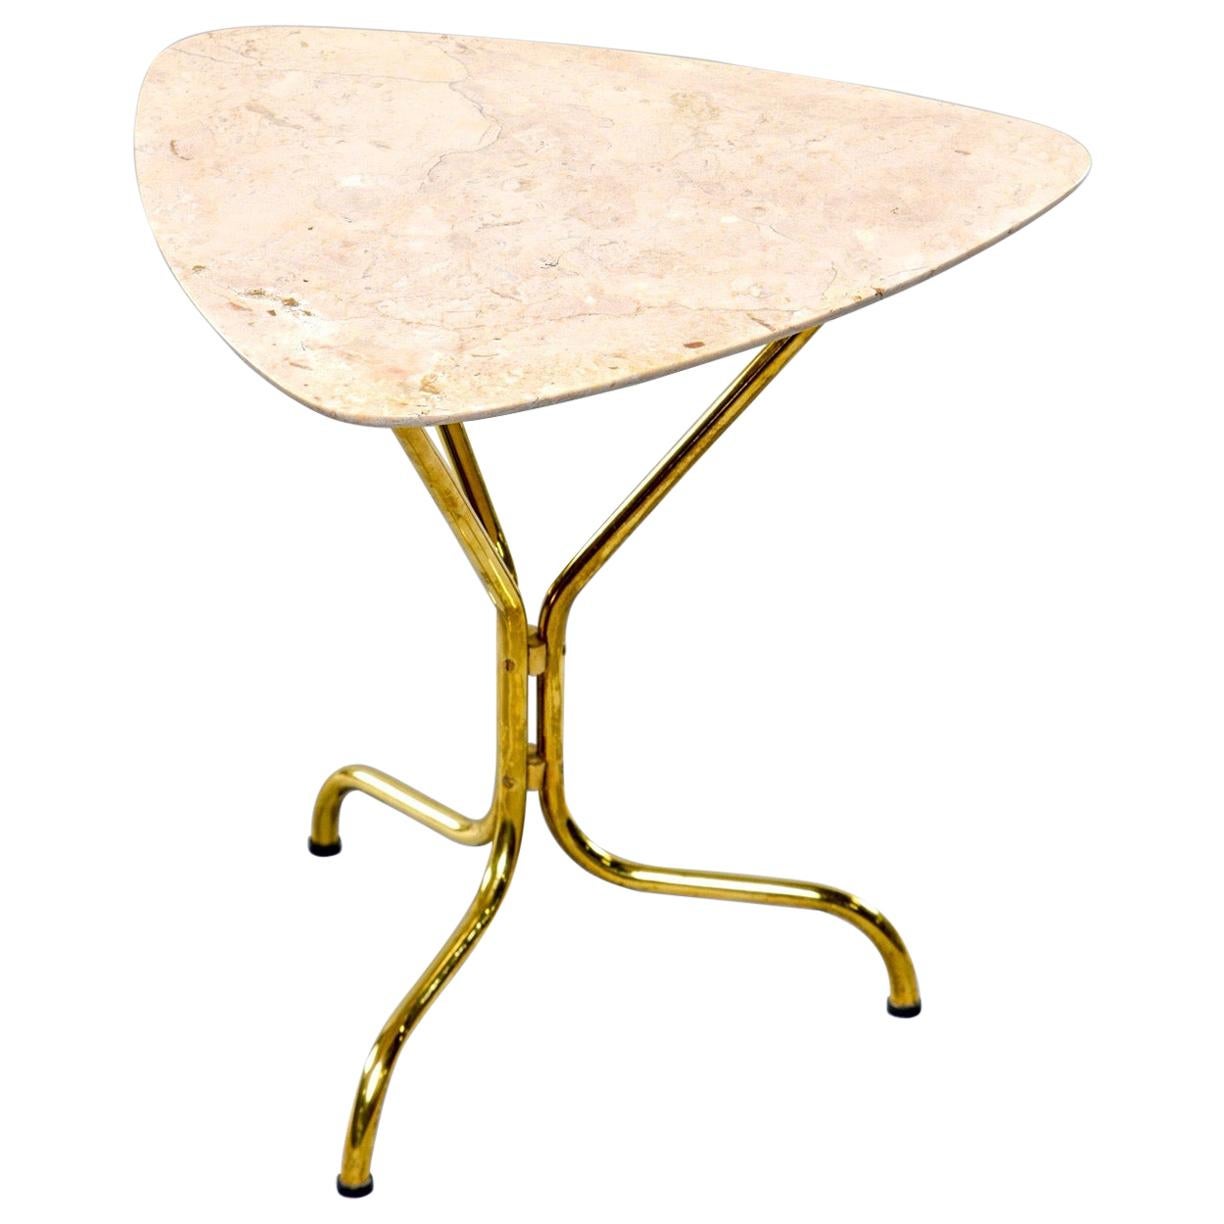 Italian Midcentury Side Table with Brass Base and Travertine Top